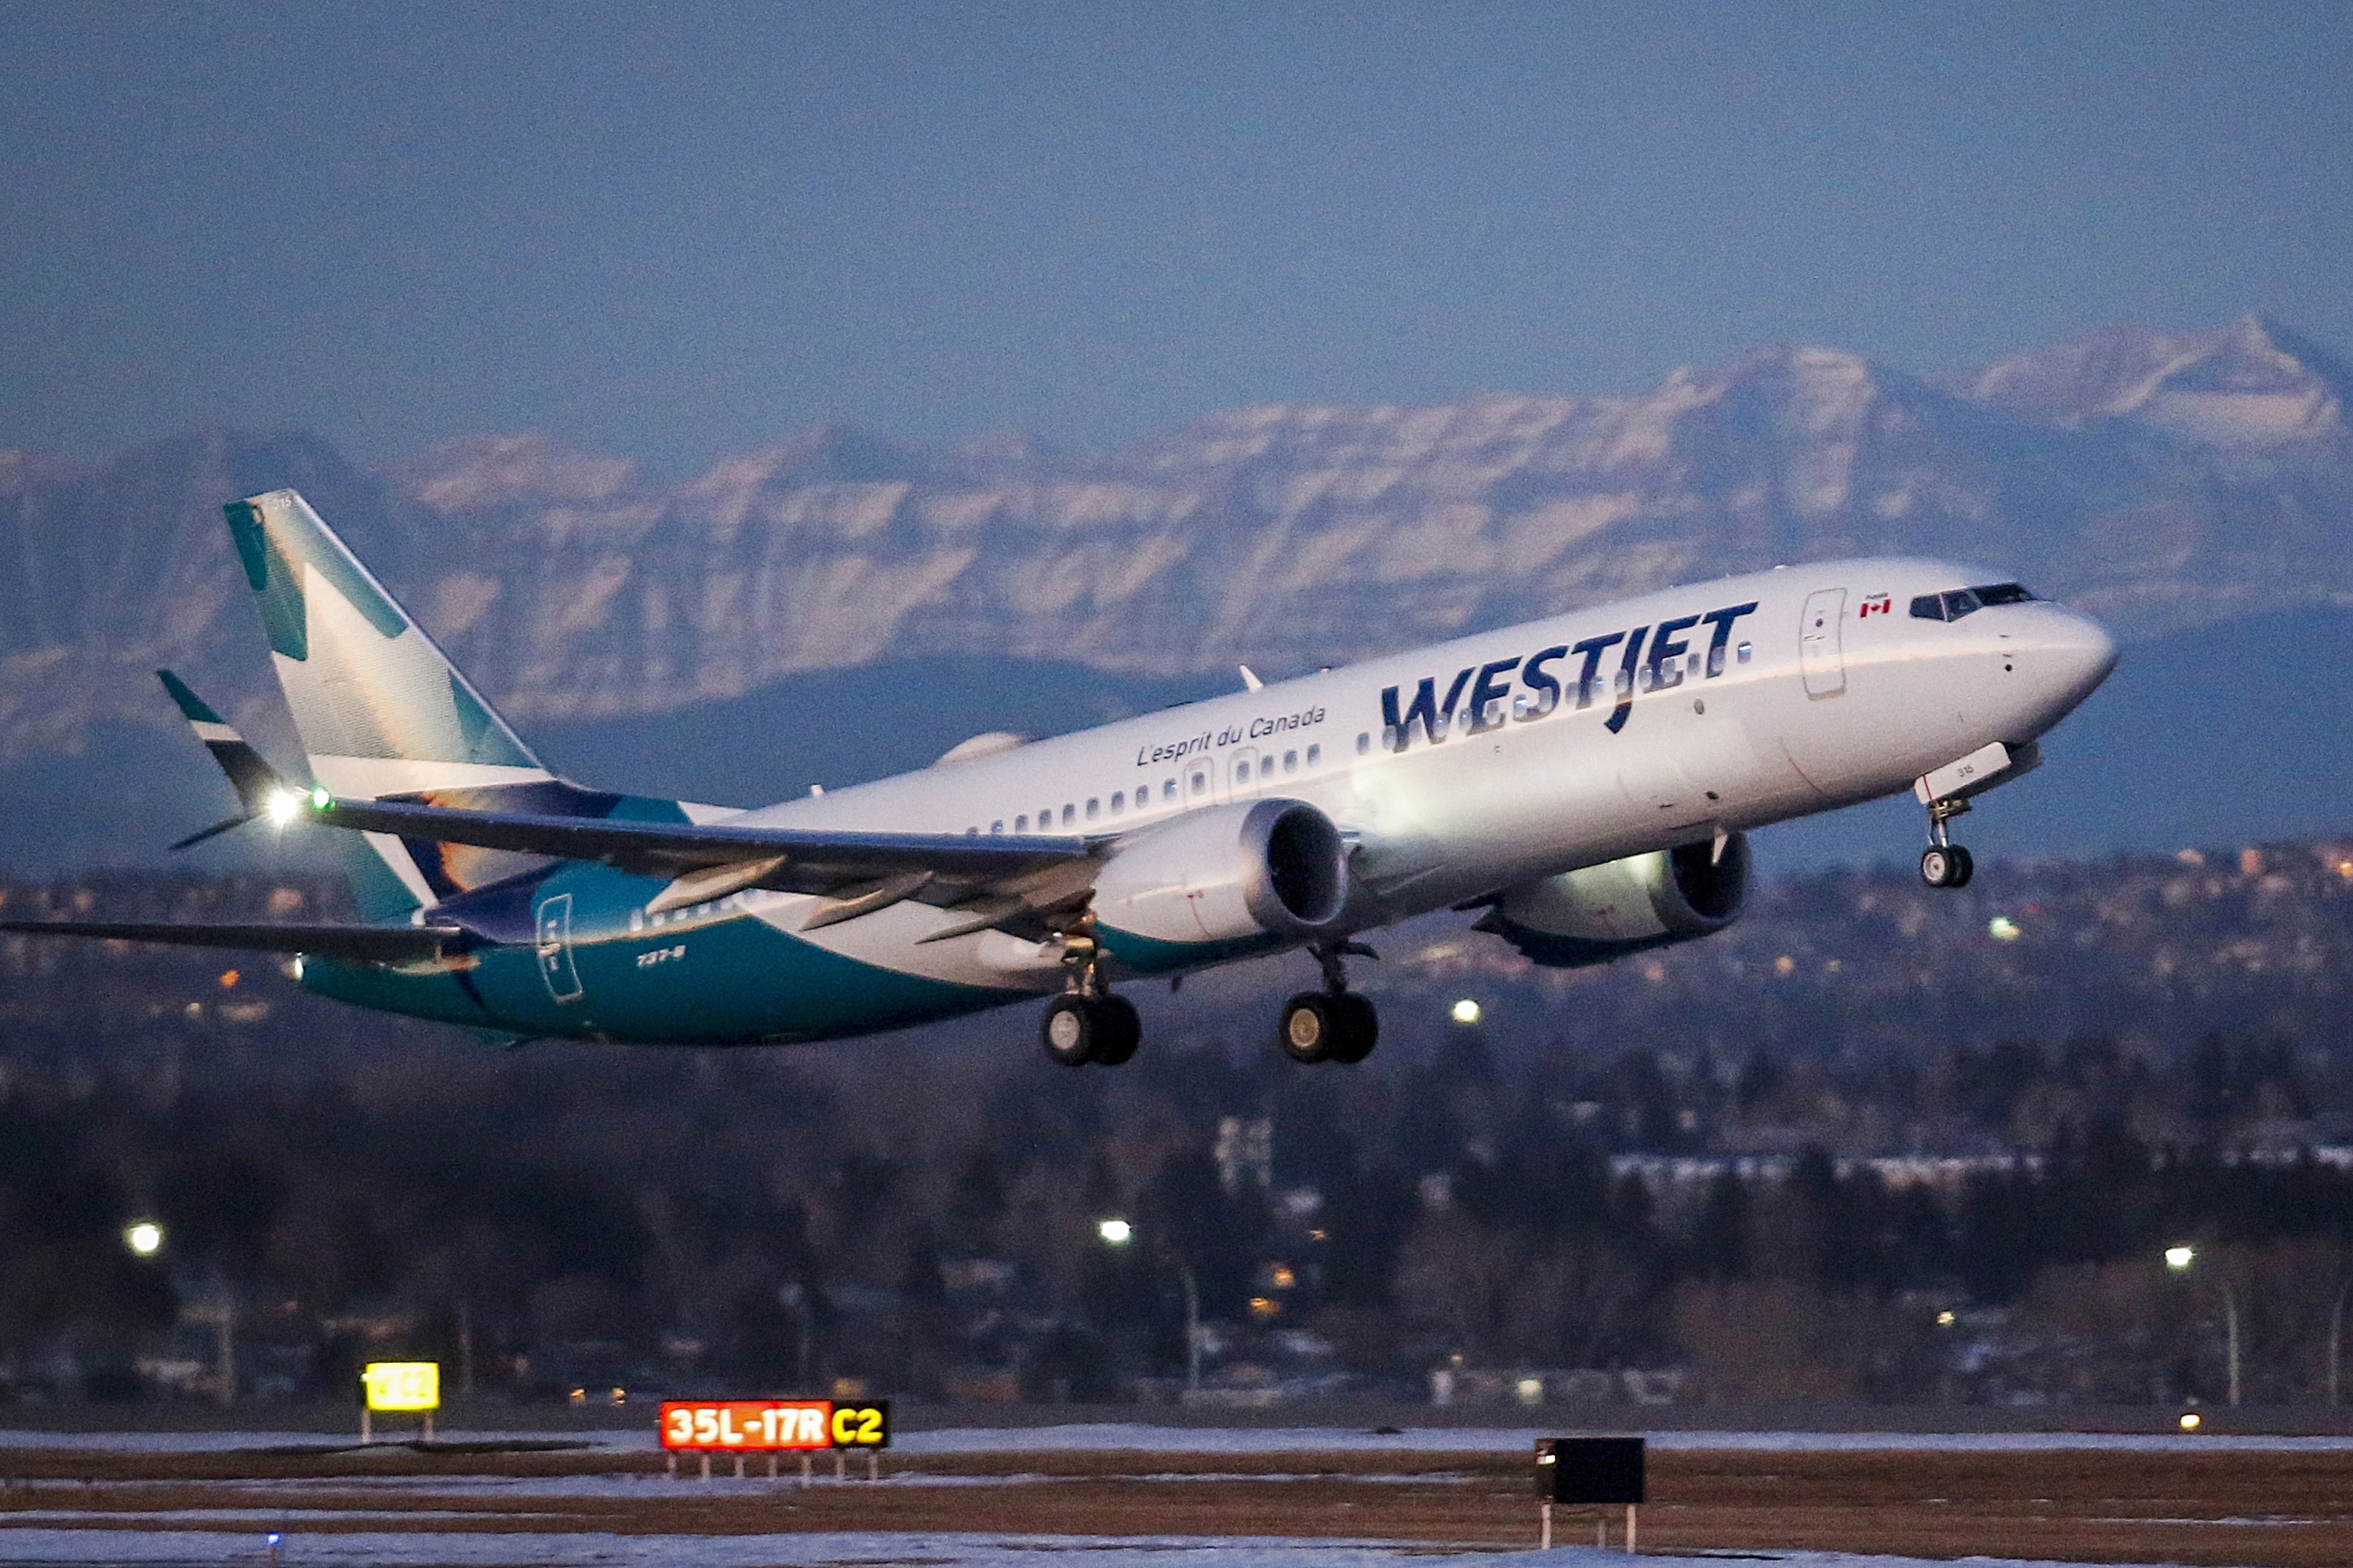 FILE - A westJet airplane takes off in Calgary, Alta., Jan. 21, 202. Mechanics at the Canadian airline WestJet say they are dropping plans to begin a strike now that the airline has agreed to resume negotiations on a new collective-bargaining agreement. Members of the Aircraft Mechanics Fraternal Association had been preparing to walk off the job on Thursday night. (Jeff McIntosh/The Canadian Press via AP, File)